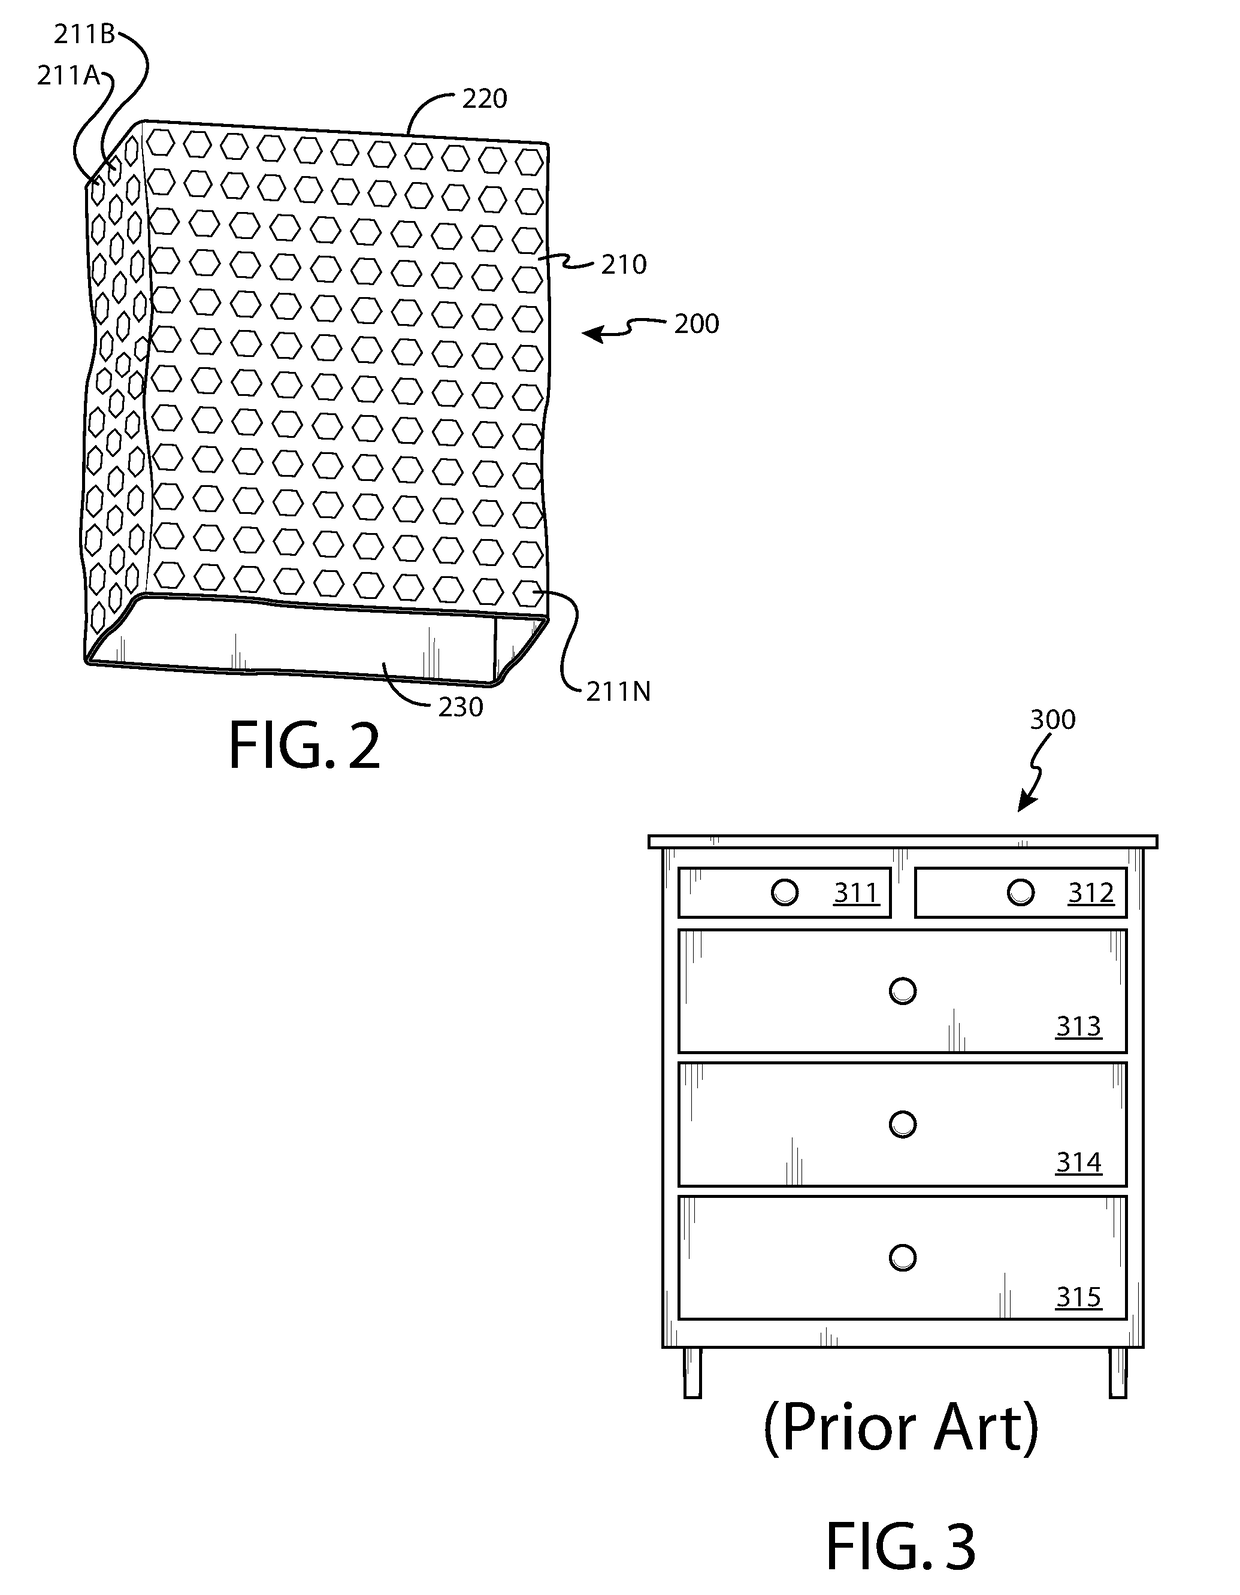 Protective Cover for Moving Items